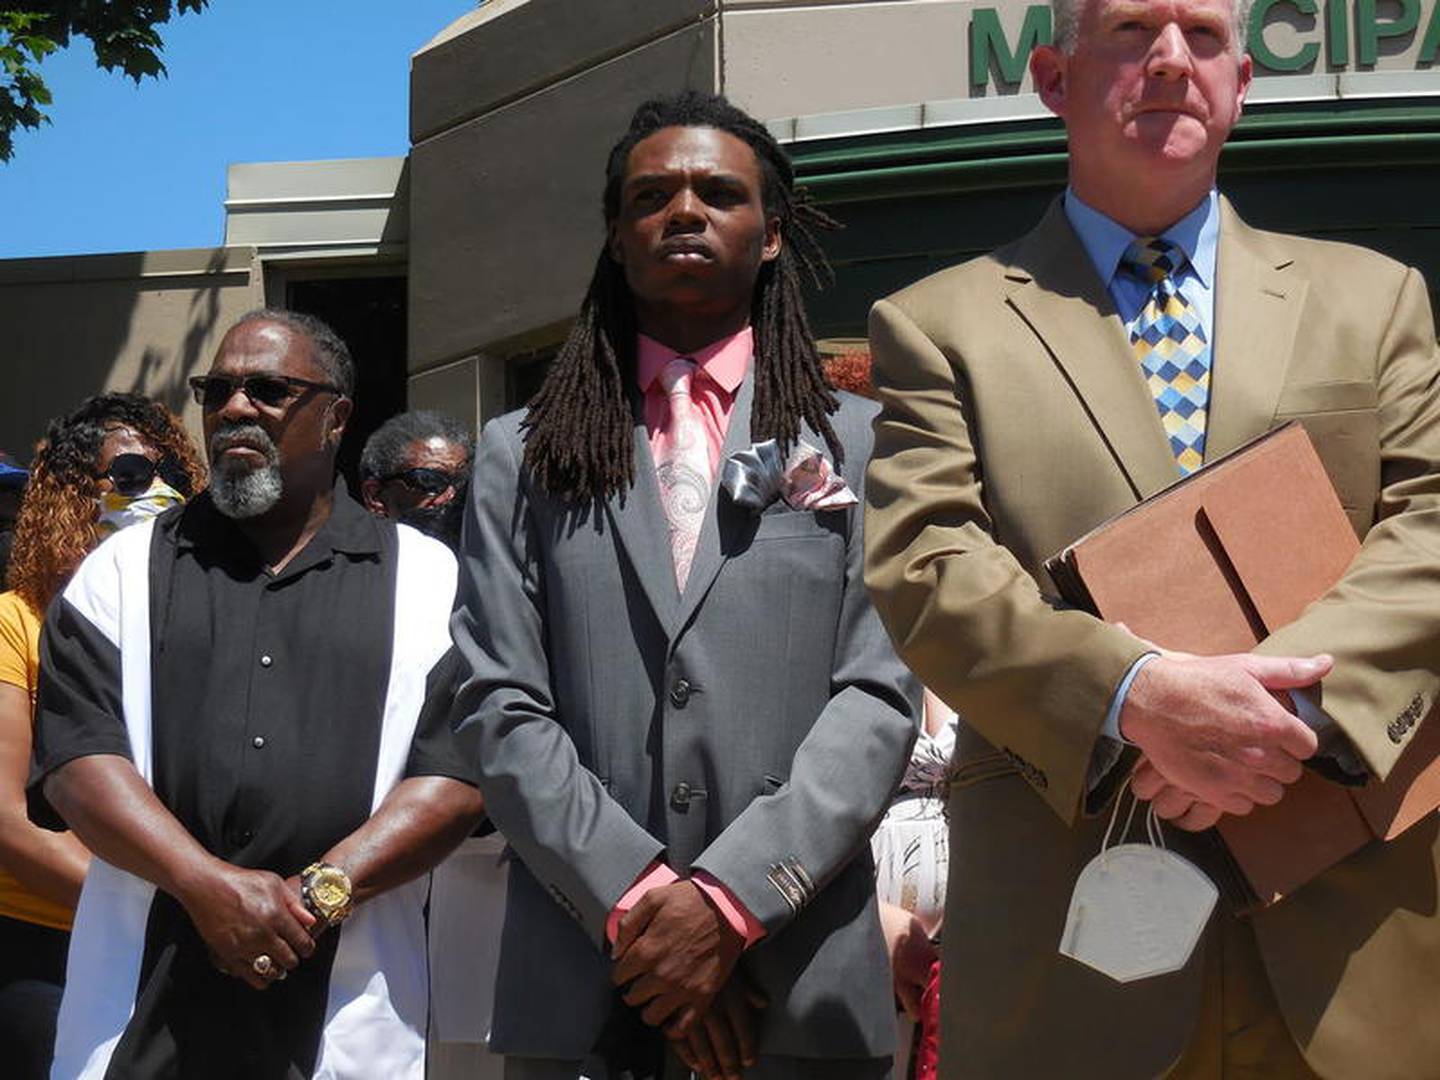 Victor Williams (center) at a press conference outside Joliet City Hall Monday. Williams was arrested after he was confronted and grabbed by Joliet Mayor Bob O'Dekirk at a Black Lives Matter demonstration May 31.